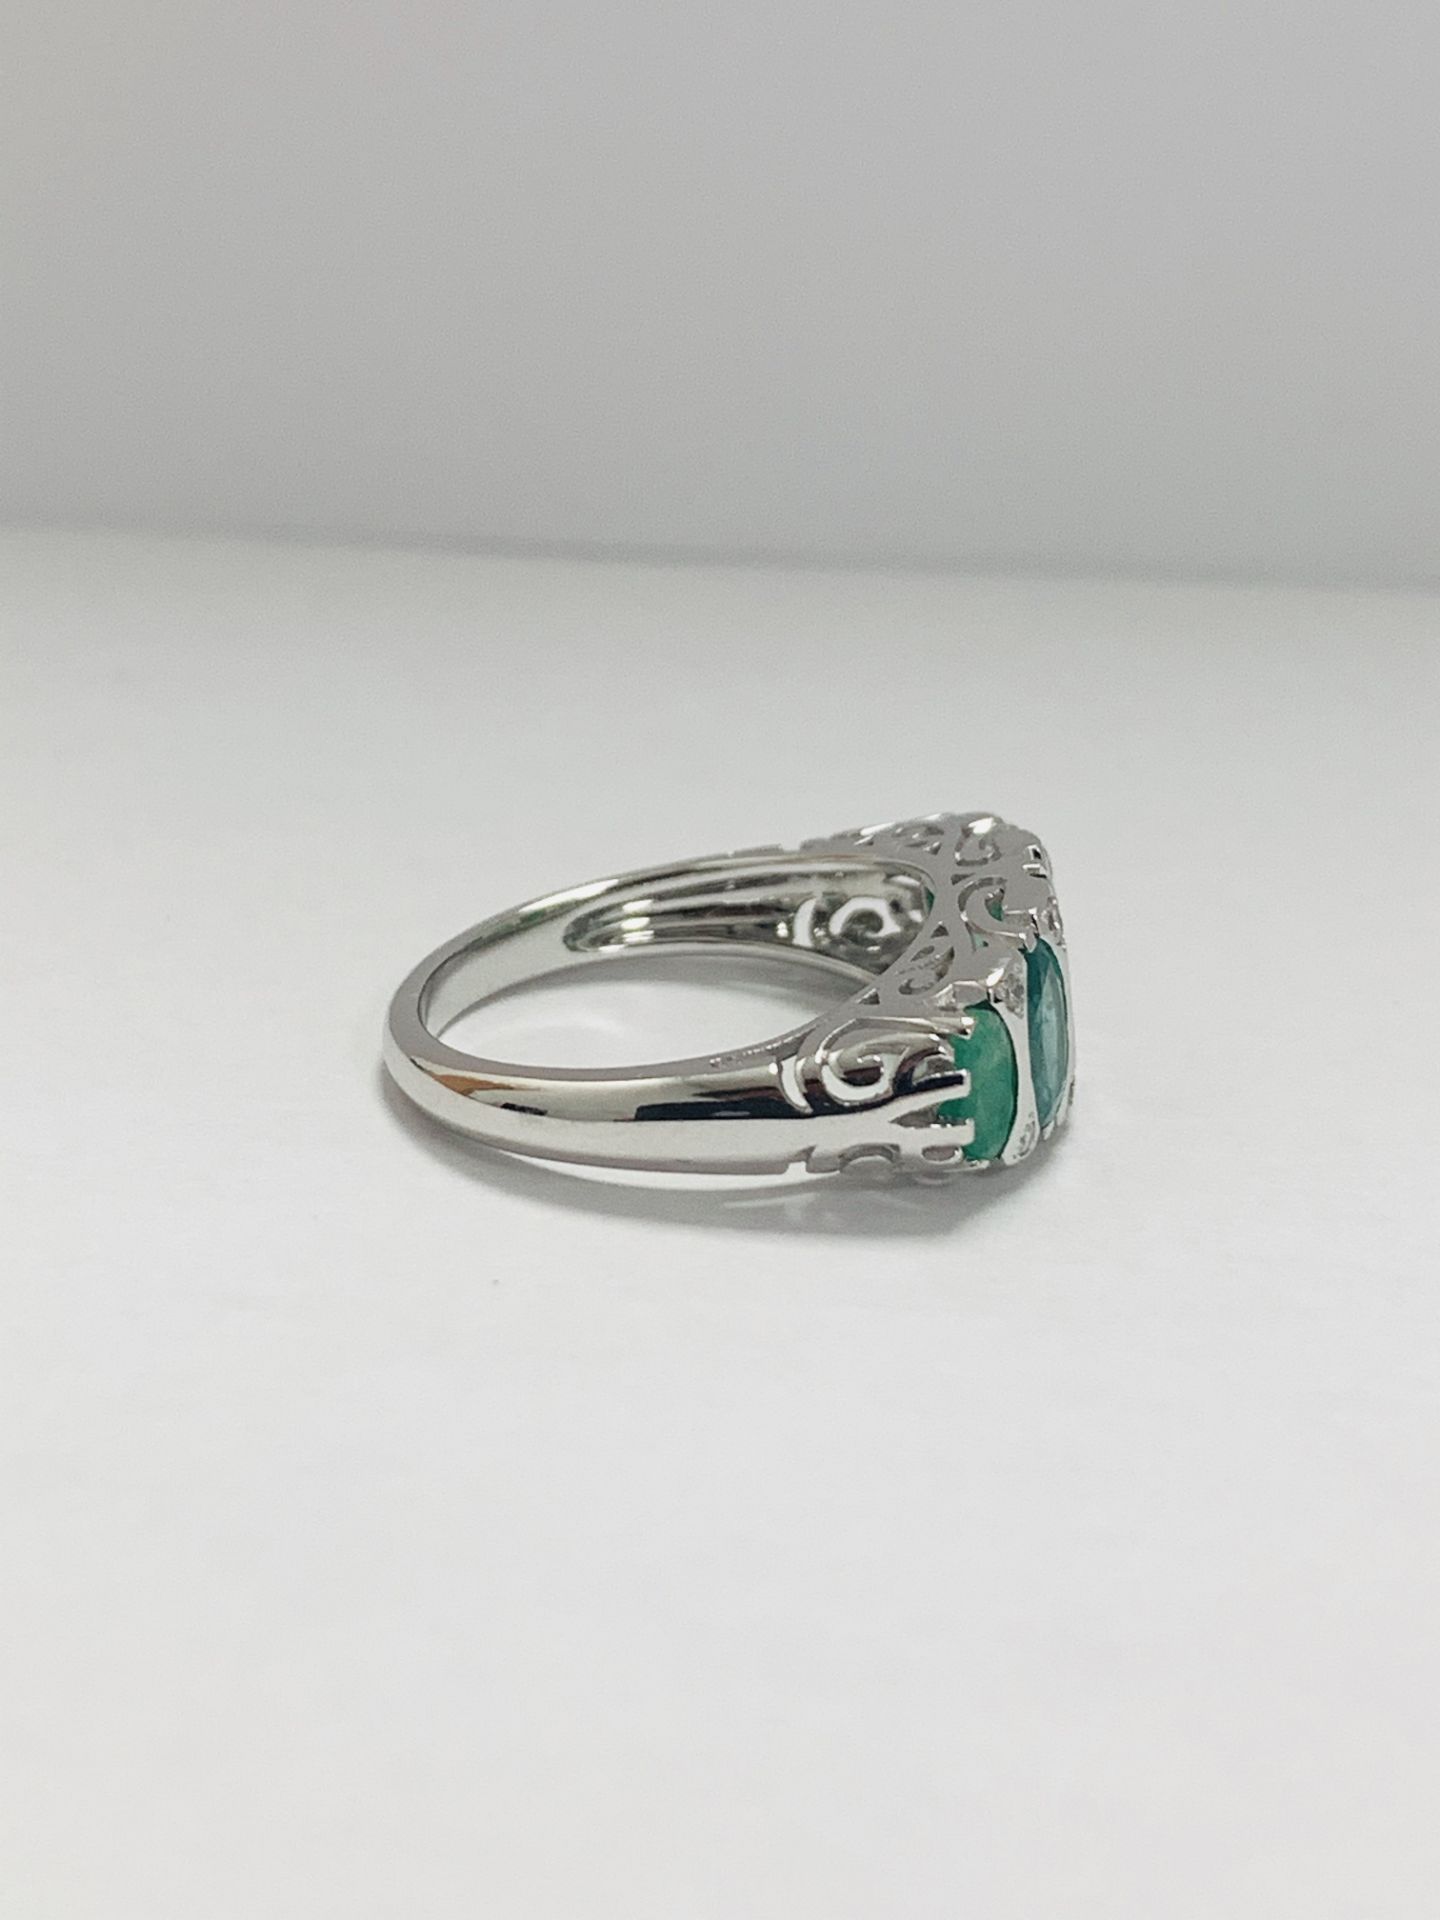 14Ct White Gold Emerald And Diamond Ring - Image 5 of 9